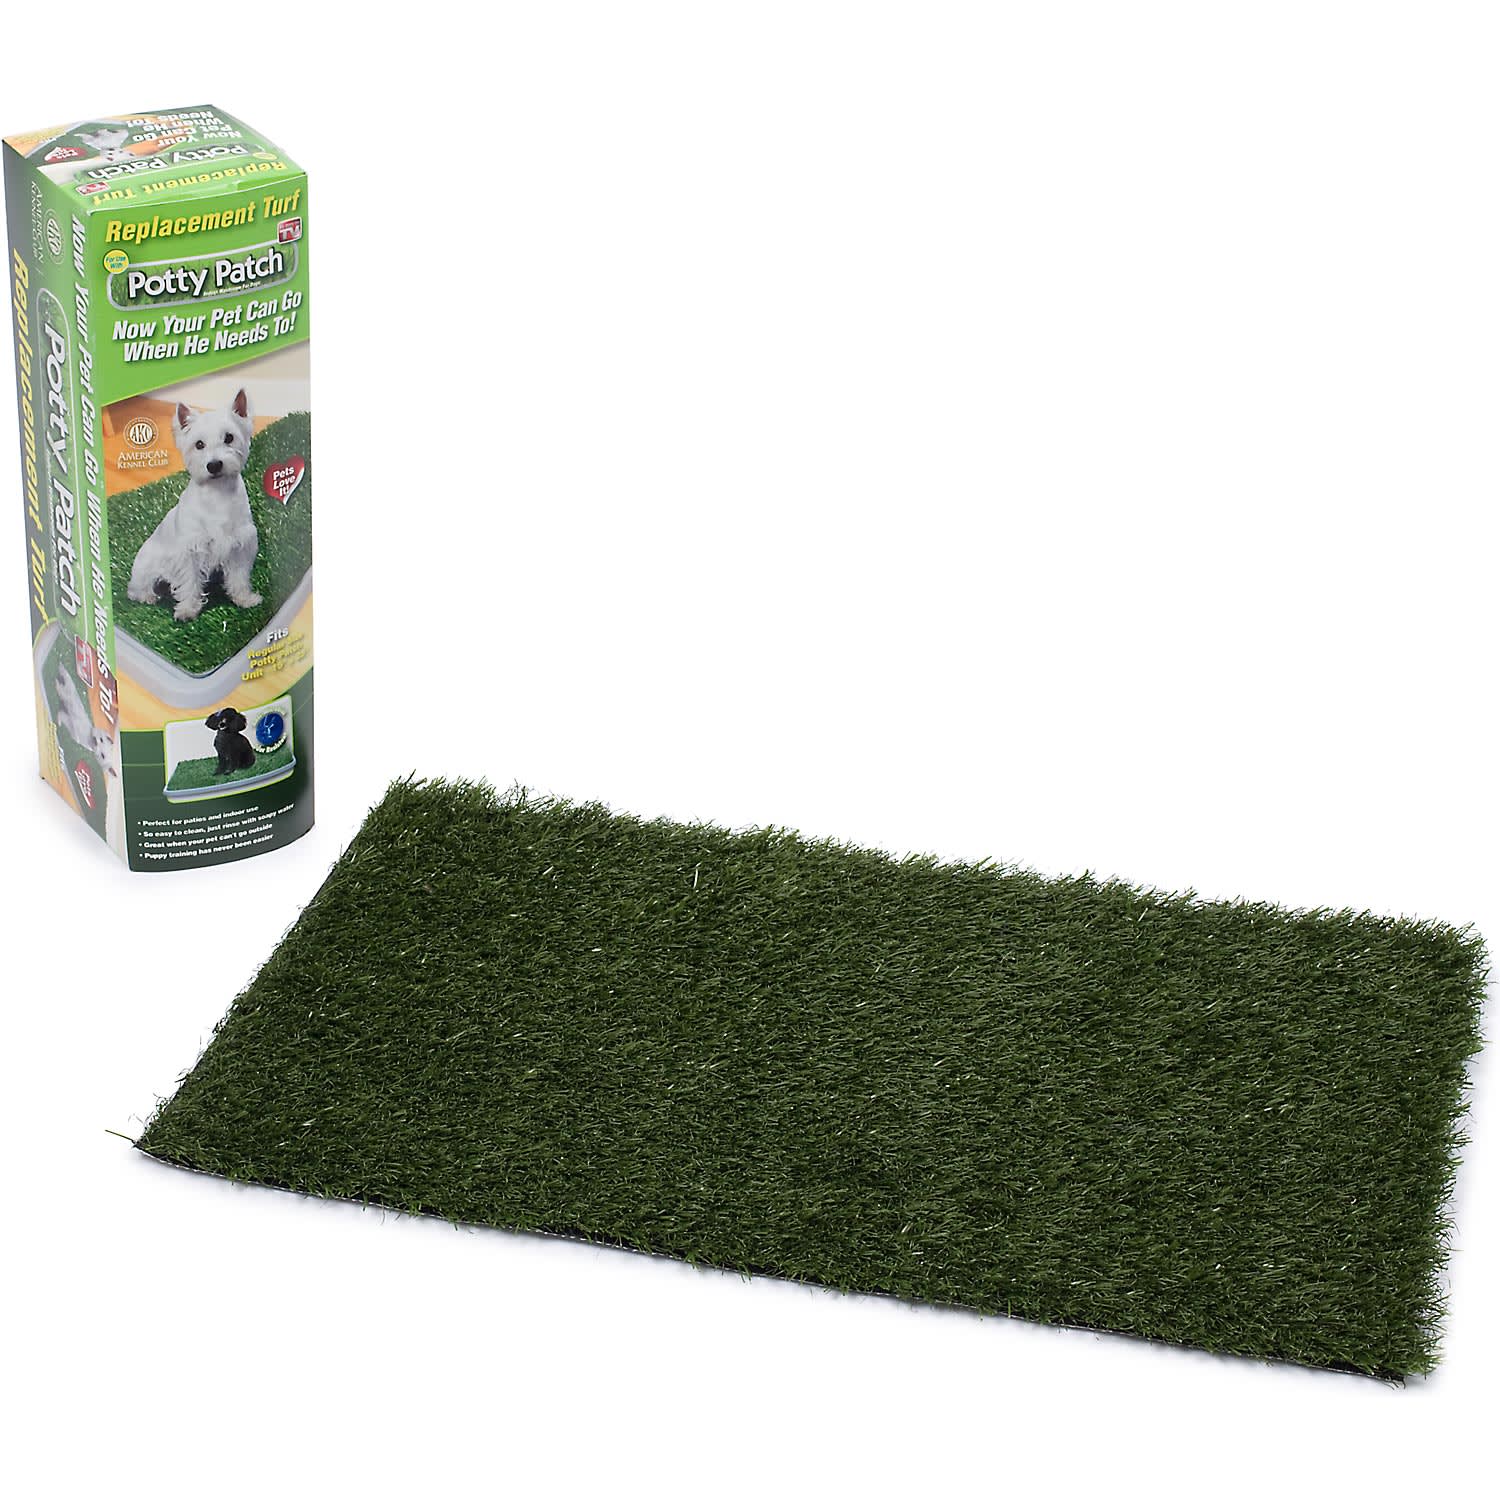 Potty Patch Replacement Turf - As Seen on TV, Small